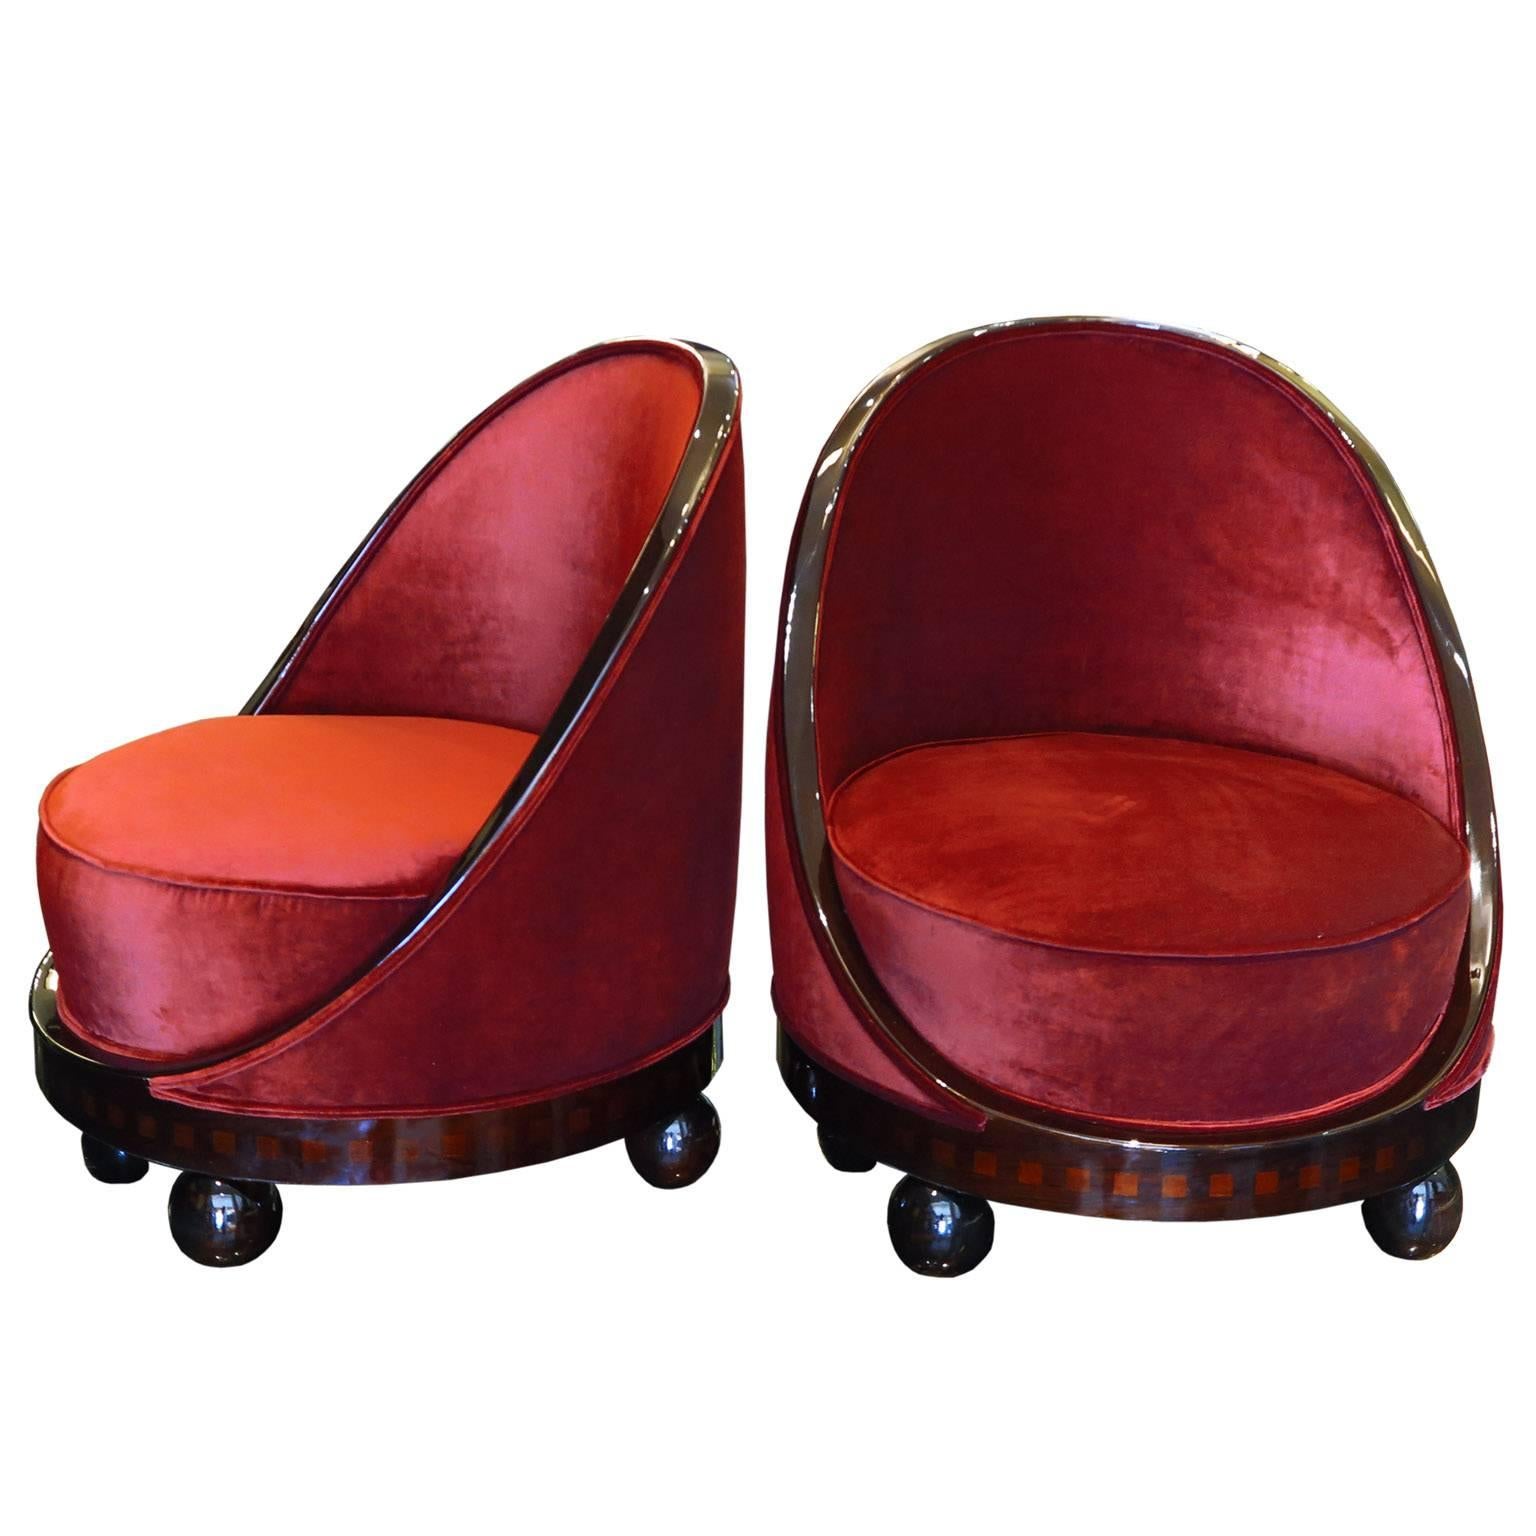 Pair of French Art Deco Boudoir Chairs with parquetry details and ball feet